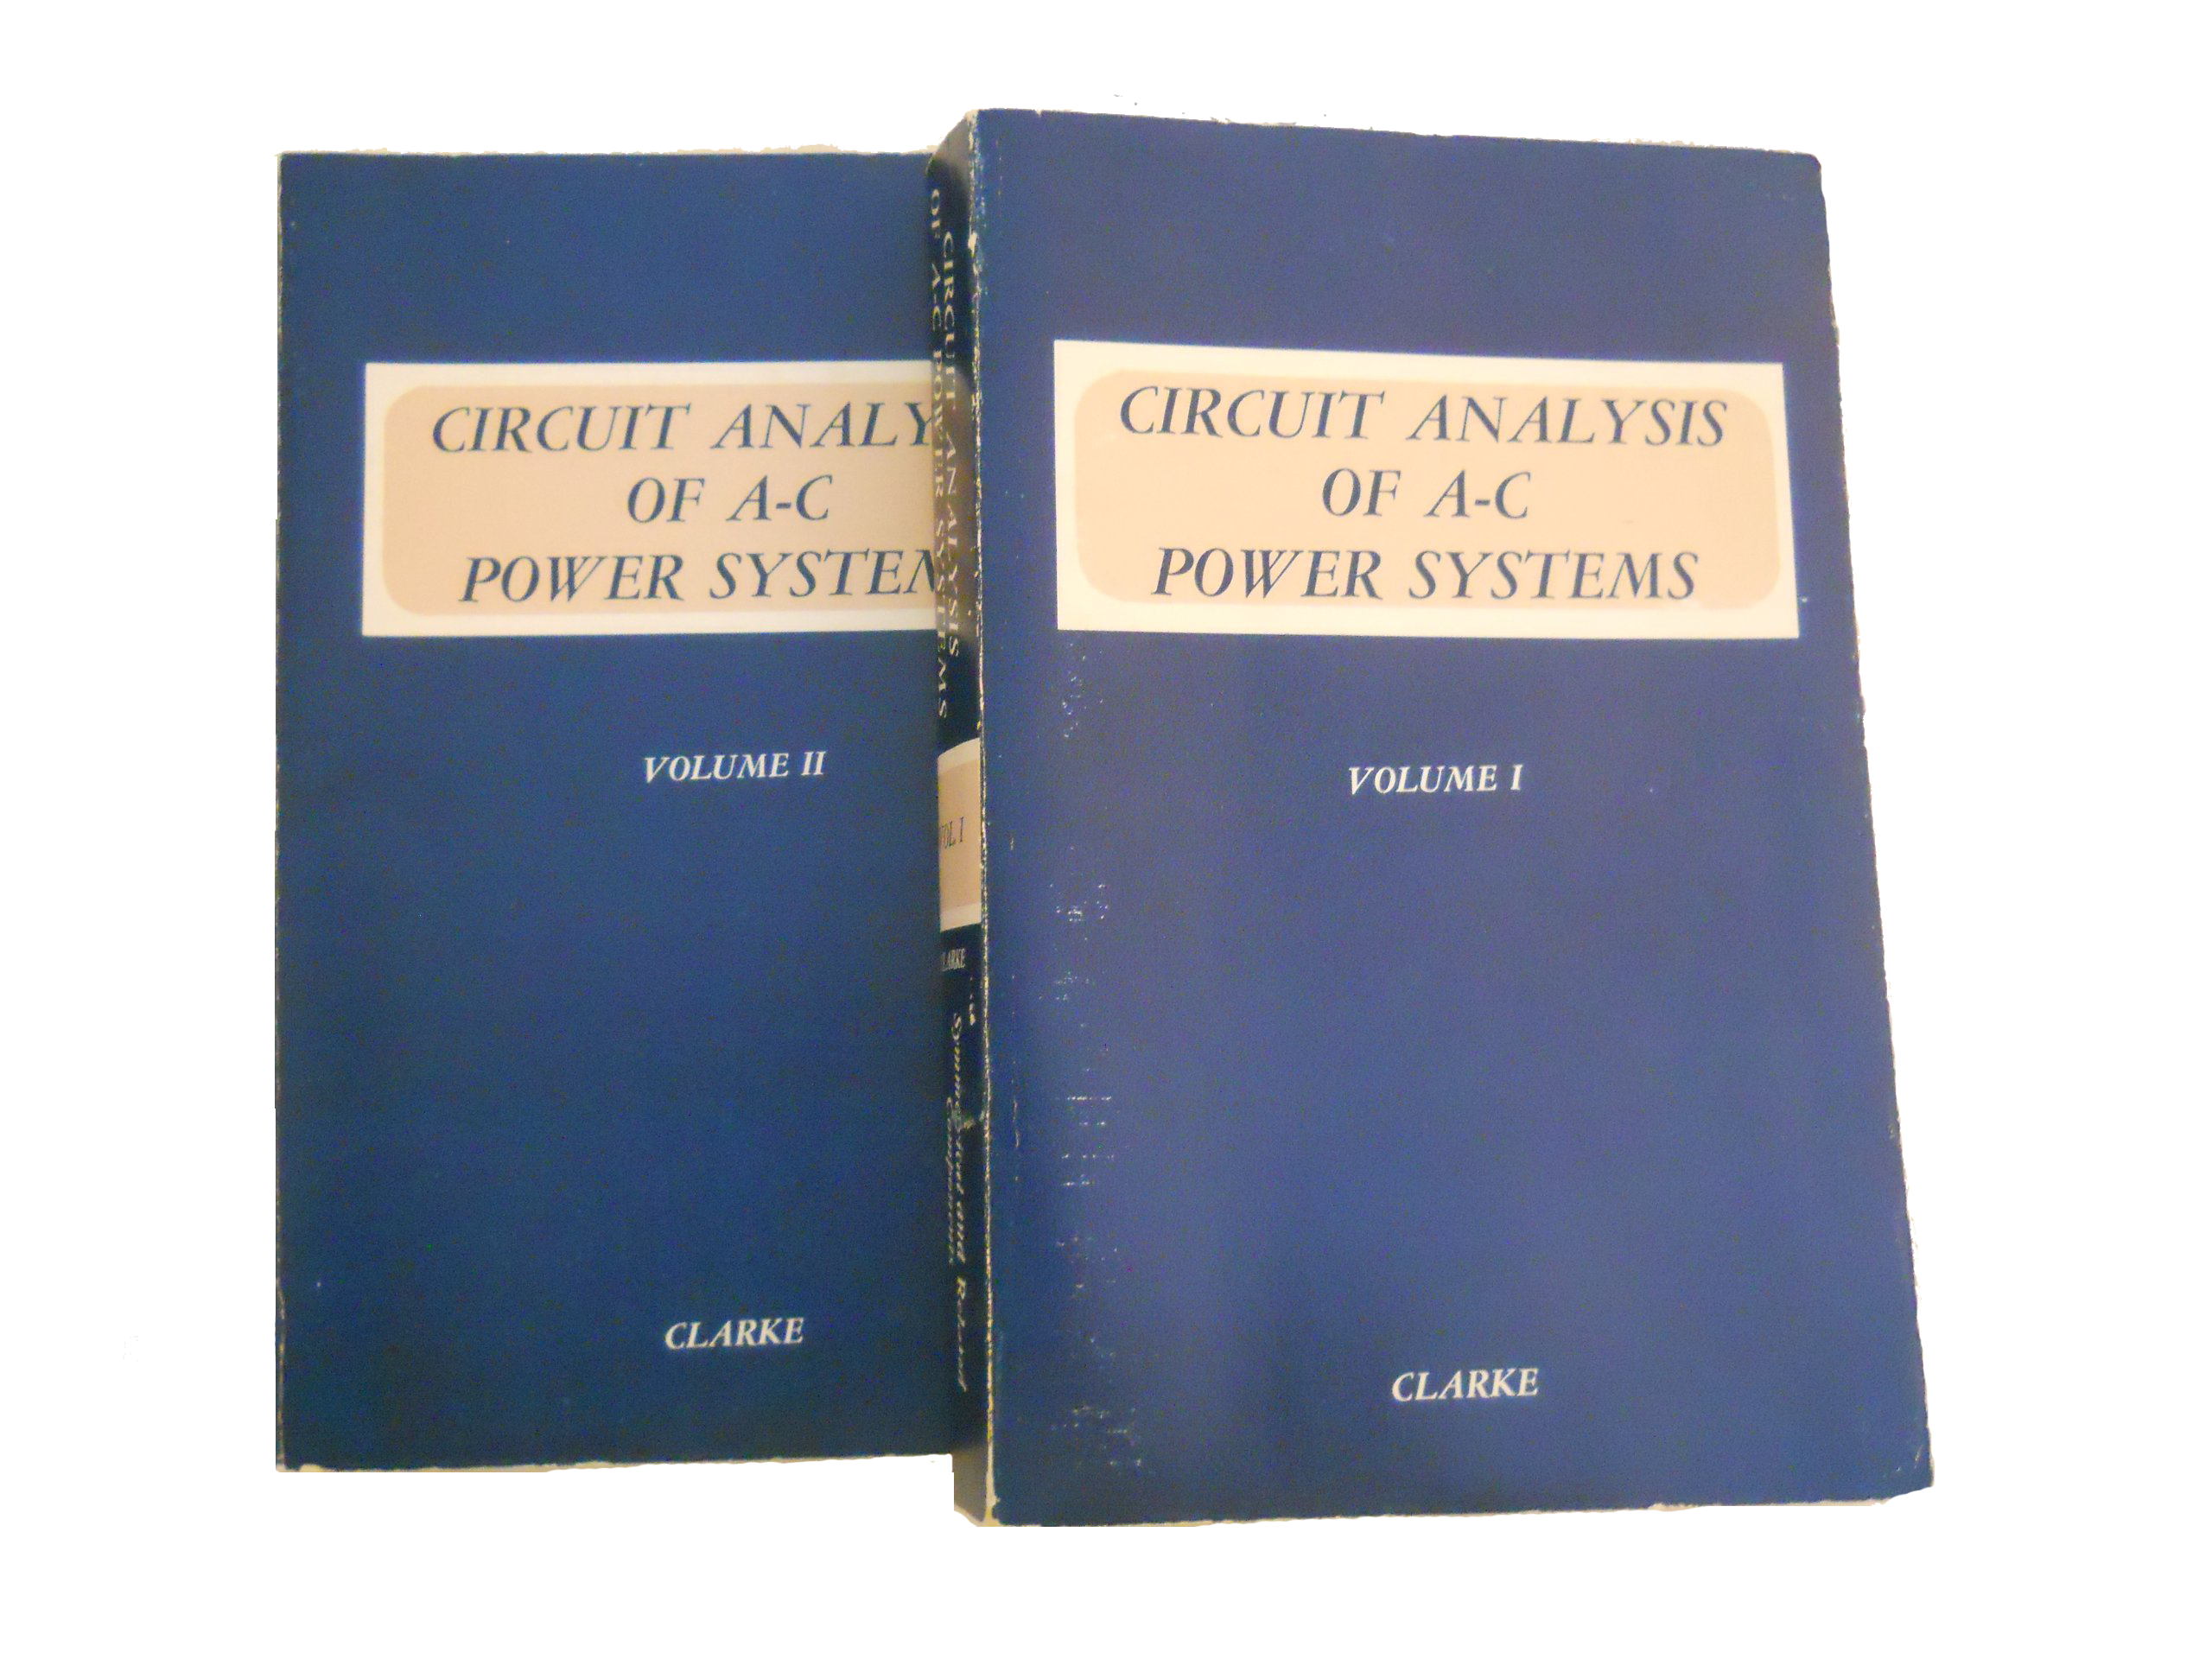 “Circuit Analysis of A-C Power Systems”, volumes 1 e 2"